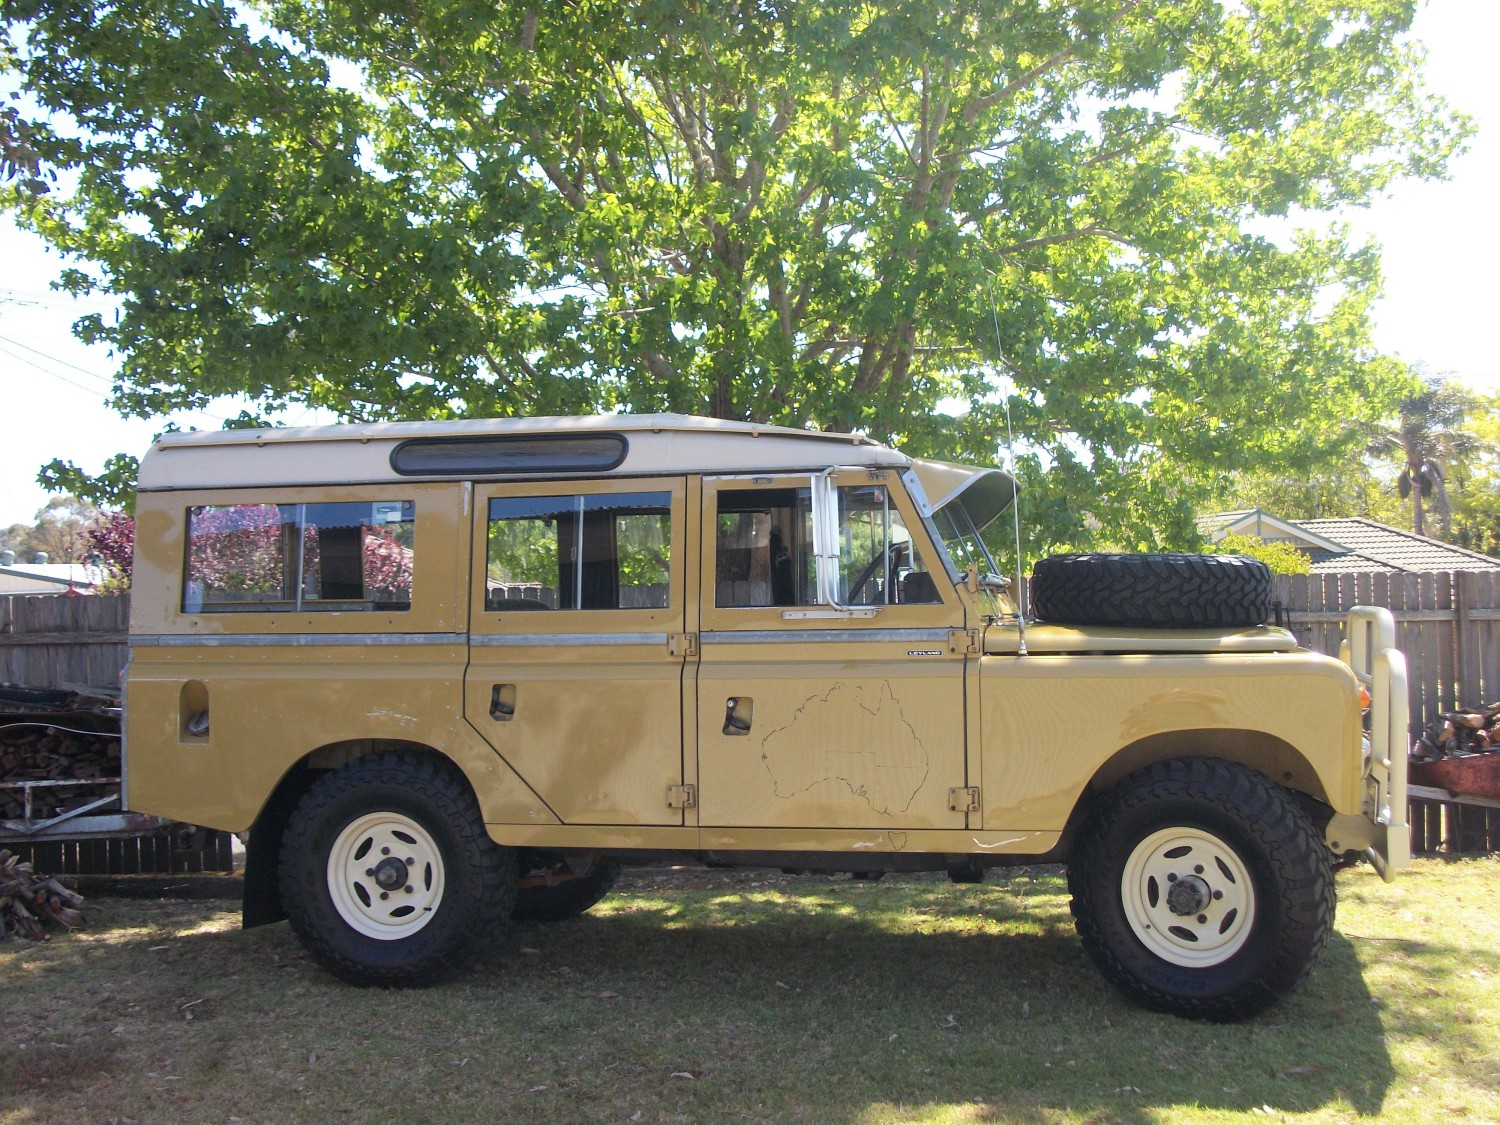 1974 Leyland Landrover Series 111 - hnoakes - Shannons Club